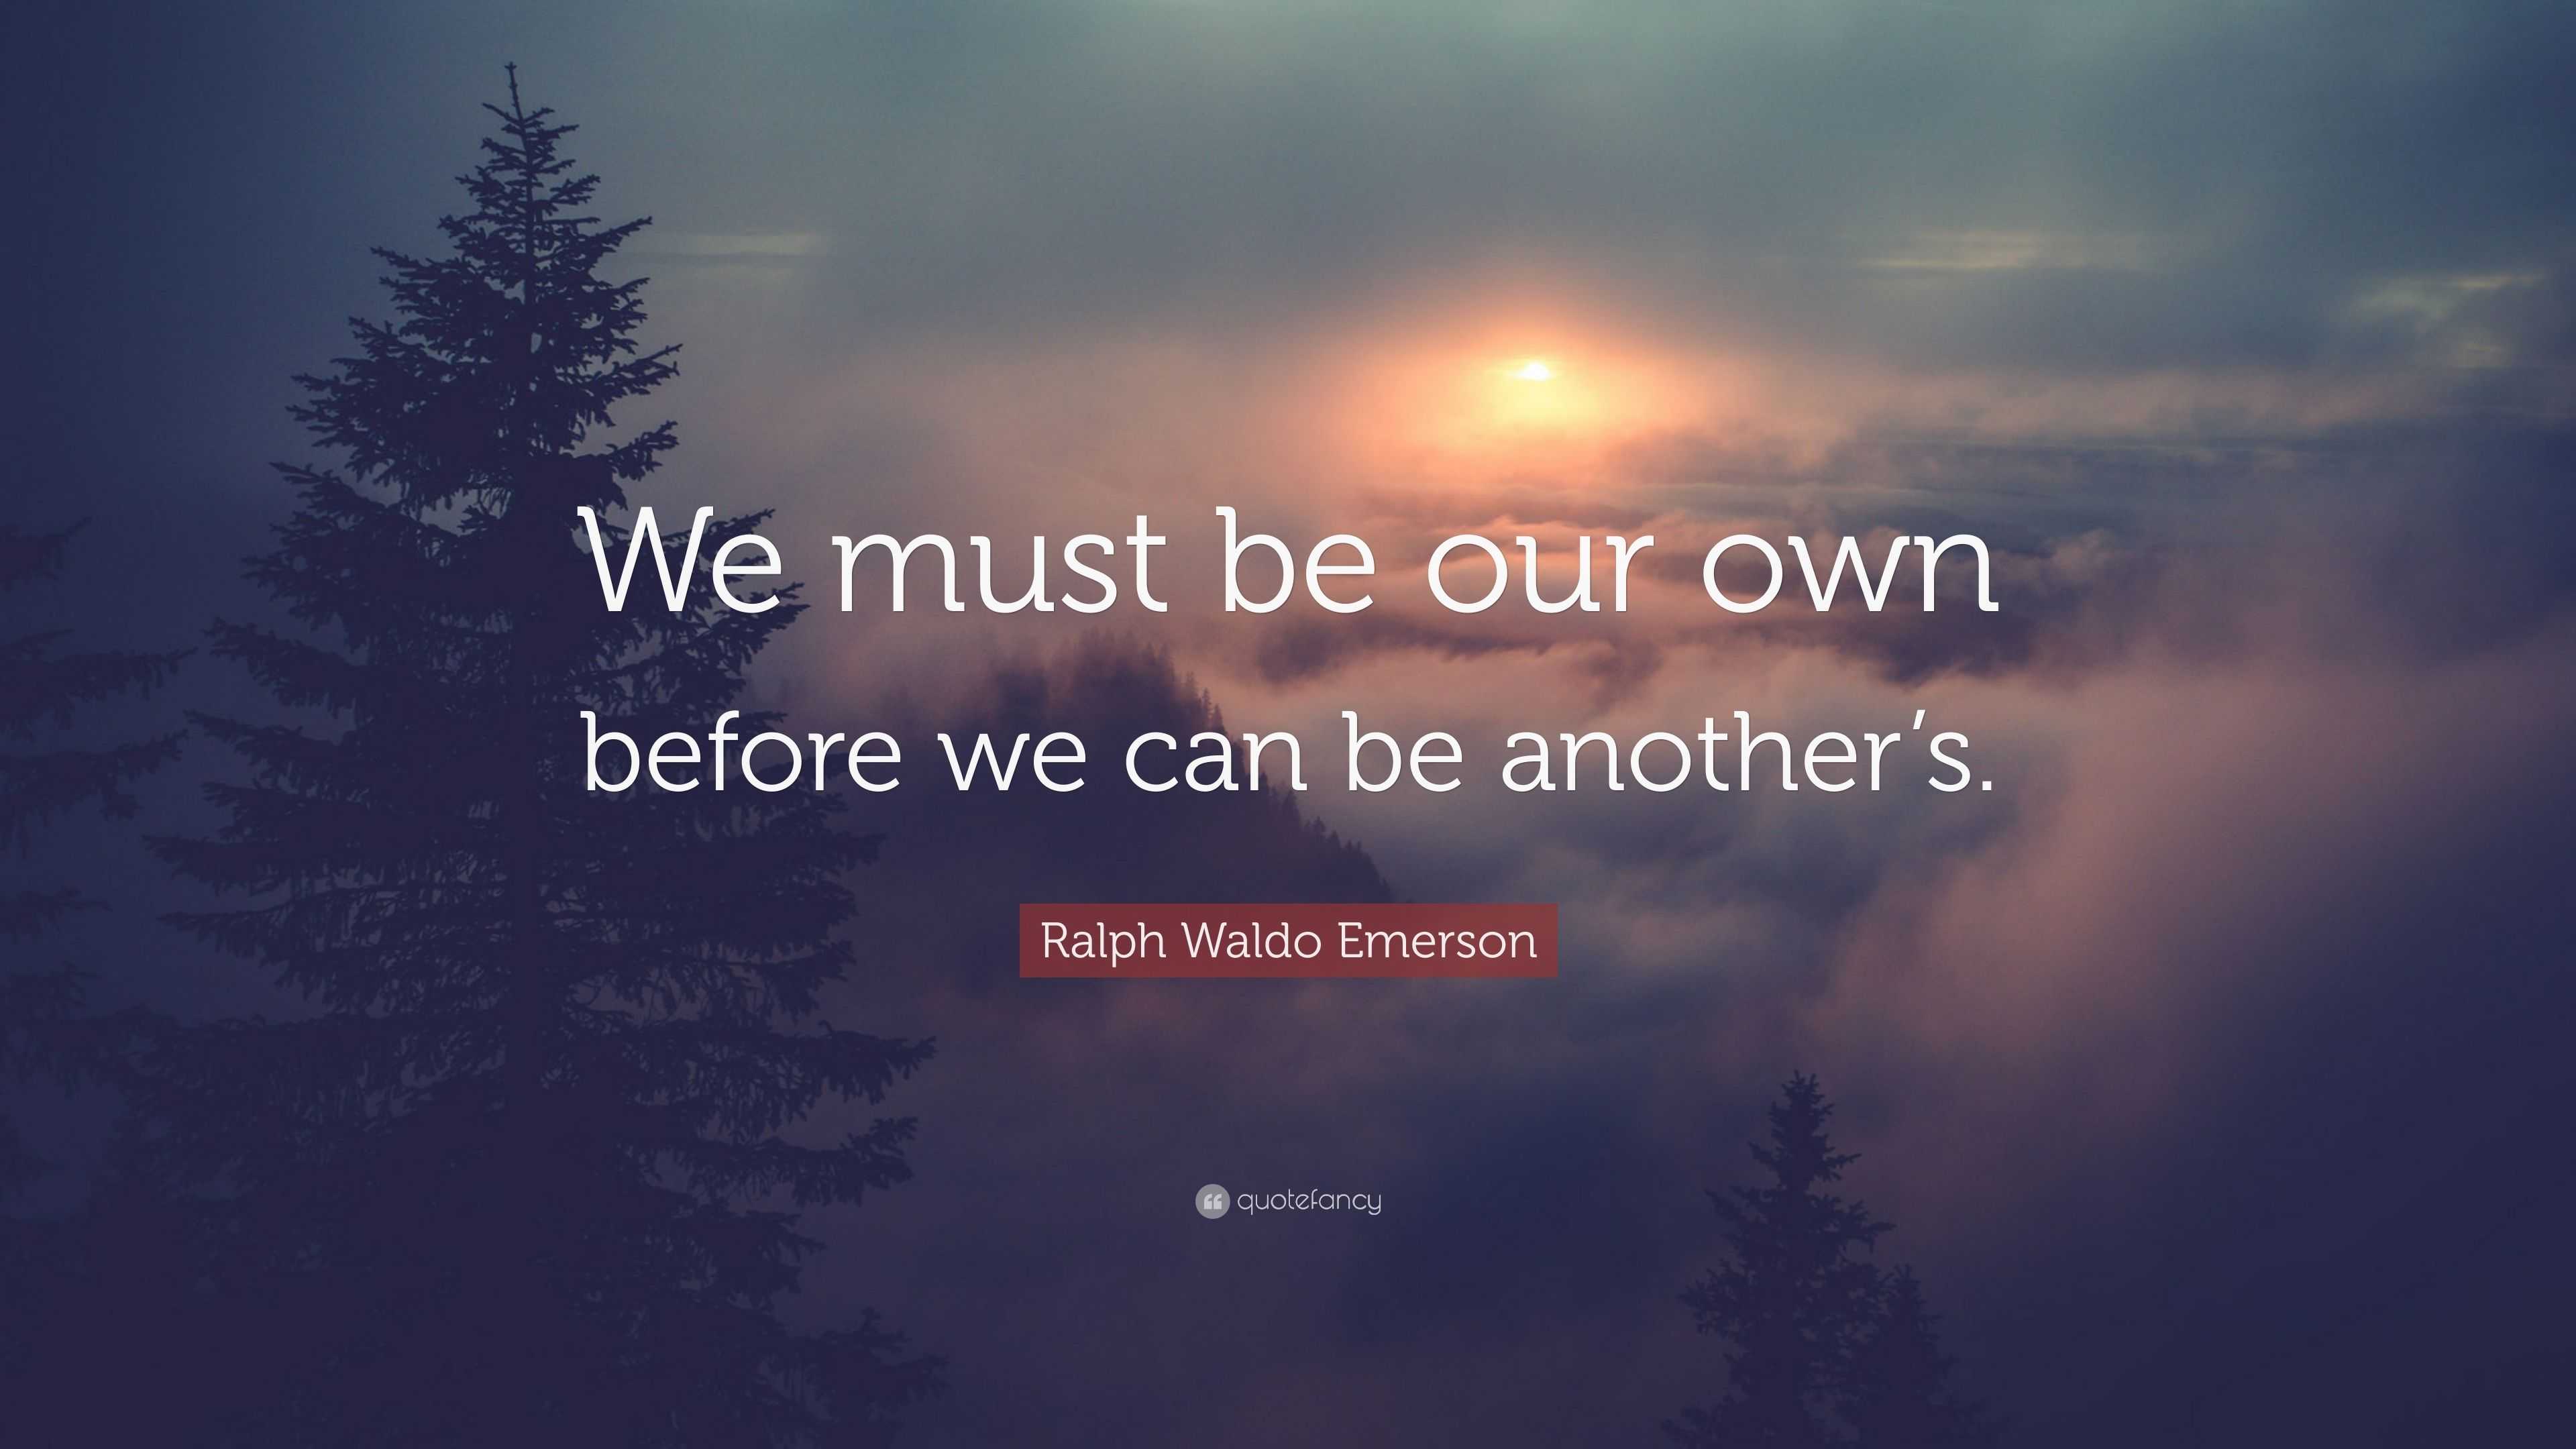 Ralph Waldo Emerson Quote: “Be an opener of doors for such as come after  thee.”